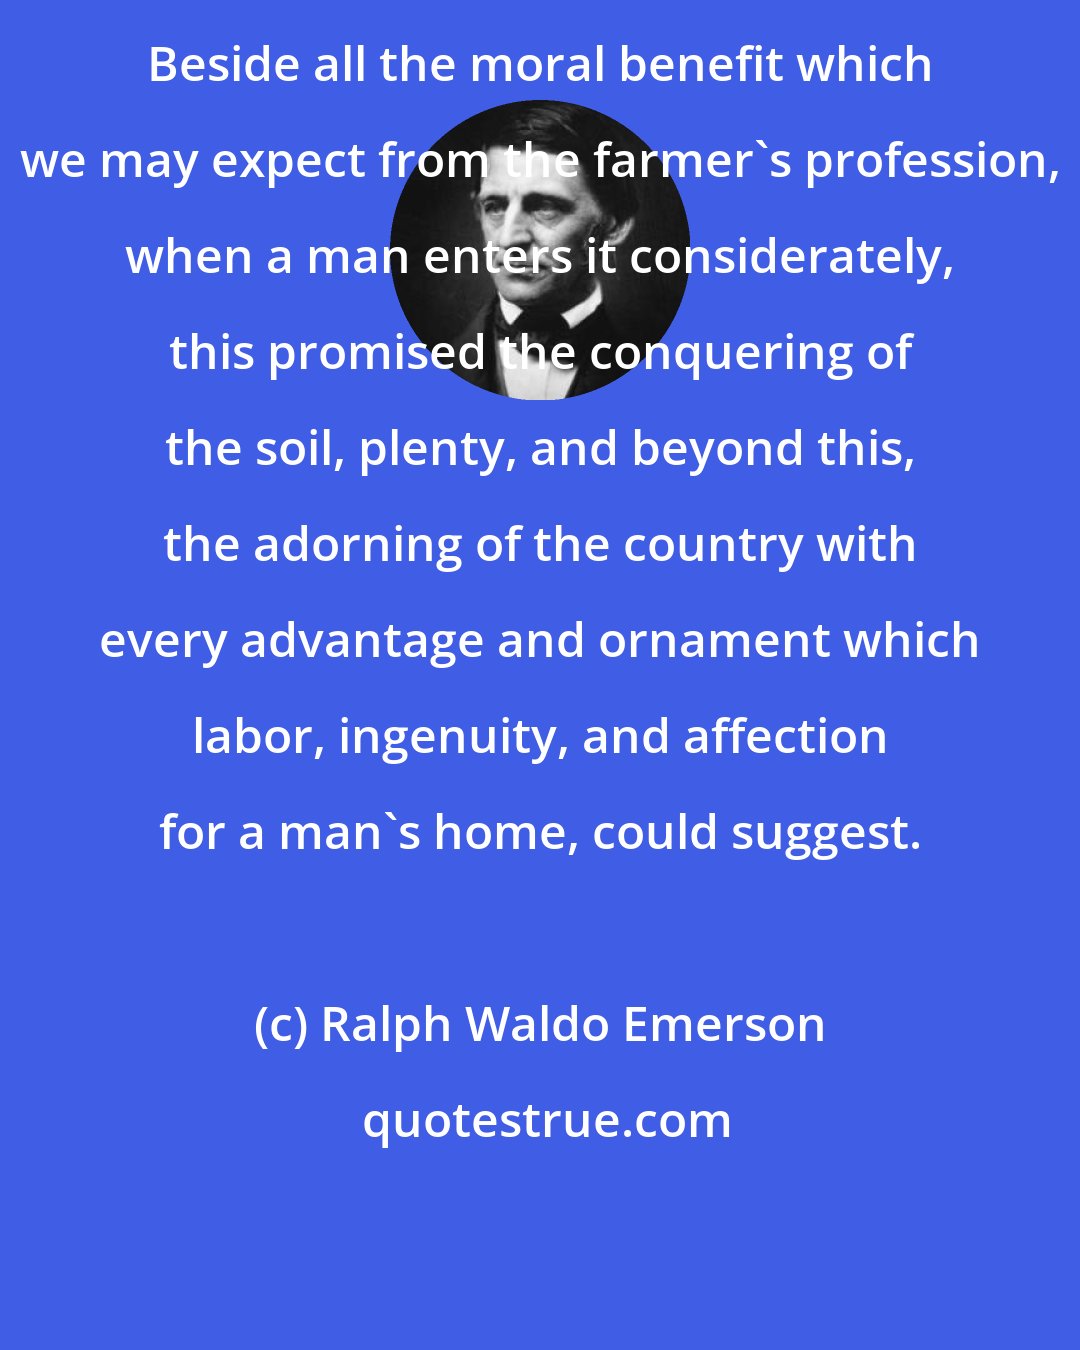 Ralph Waldo Emerson: Beside all the moral benefit which we may expect from the farmer's profession, when a man enters it considerately, this promised the conquering of the soil, plenty, and beyond this, the adorning of the country with every advantage and ornament which labor, ingenuity, and affection for a man's home, could suggest.